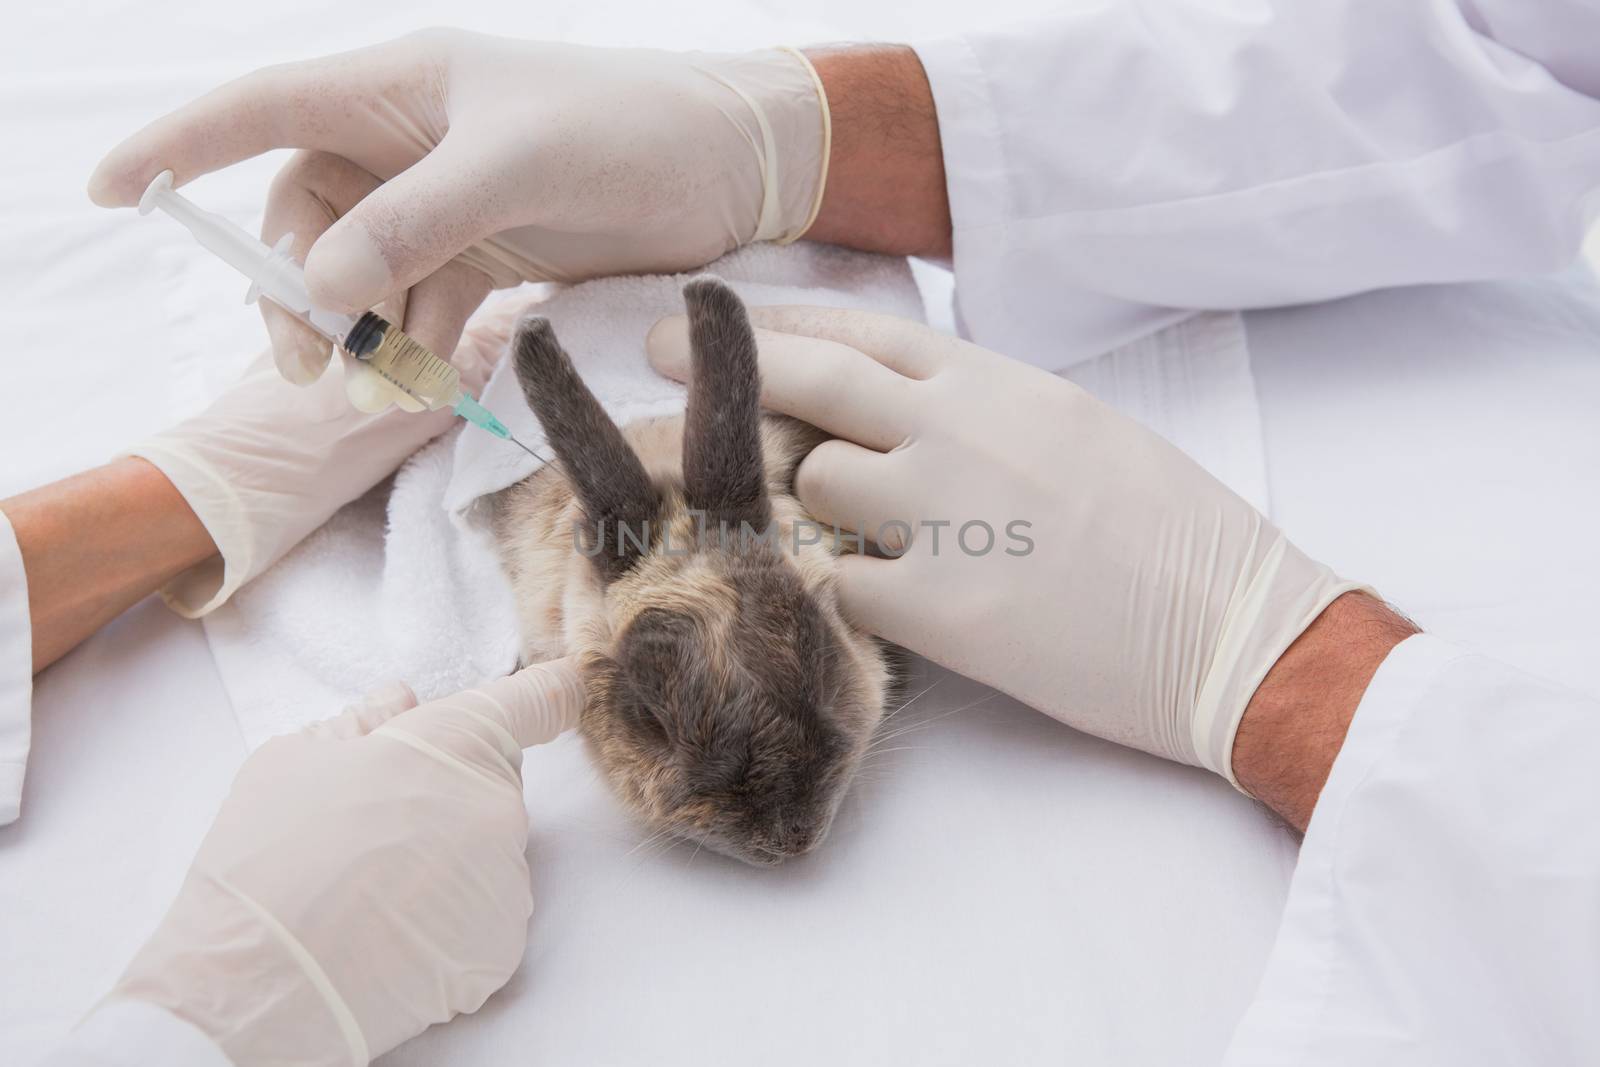 Veterinarians doing injection at a rabbit in medical office 